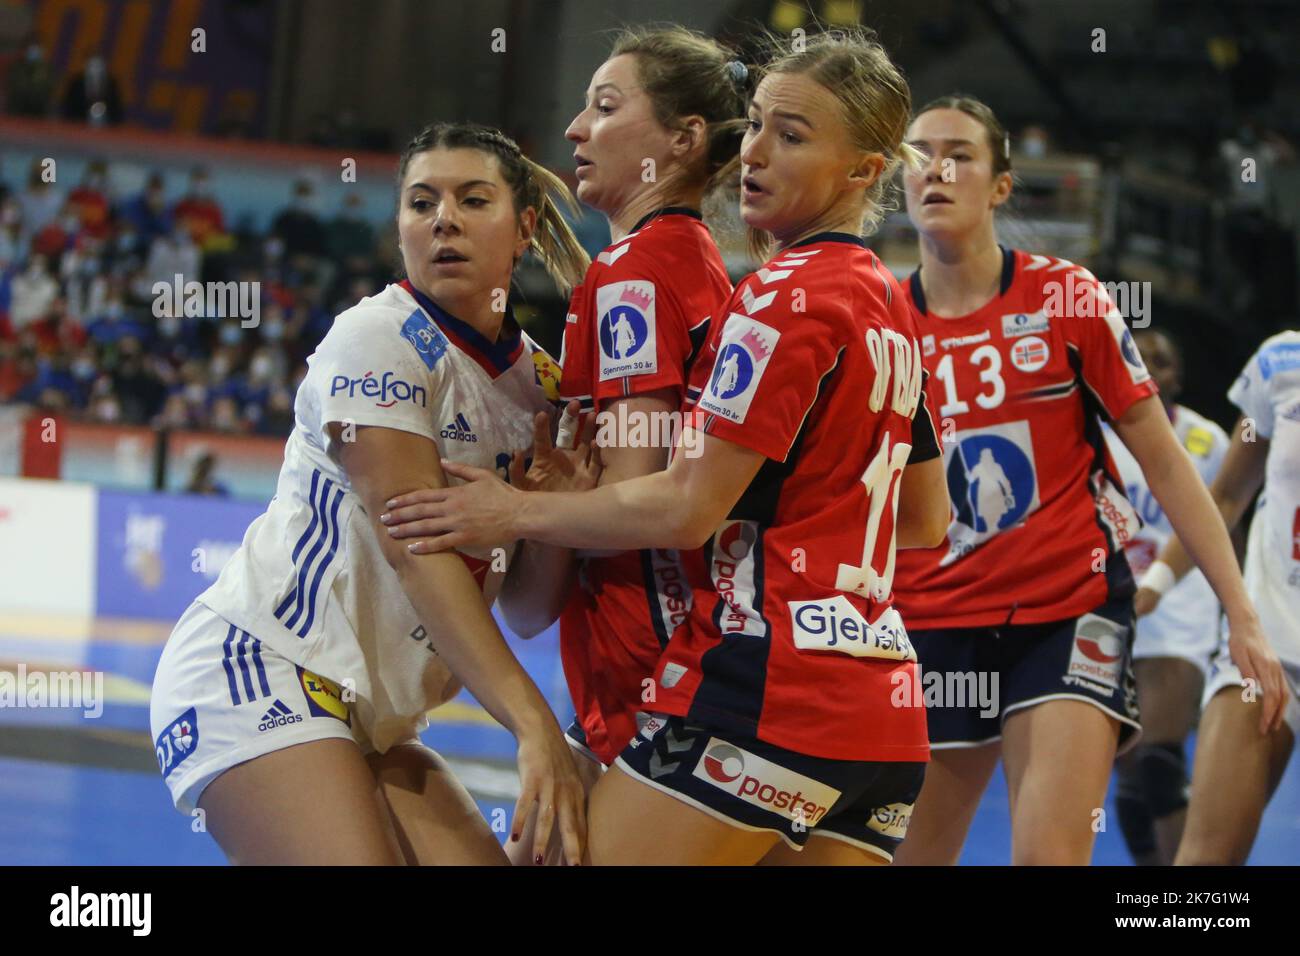 Team Denmark during the IHF Women's World Championship 2021, Third place  final handball match between Denmark and Spain on December 19, 2021 at  Palau d'Esports de Granollers in Granollers, Barcelona, Spain. Photo